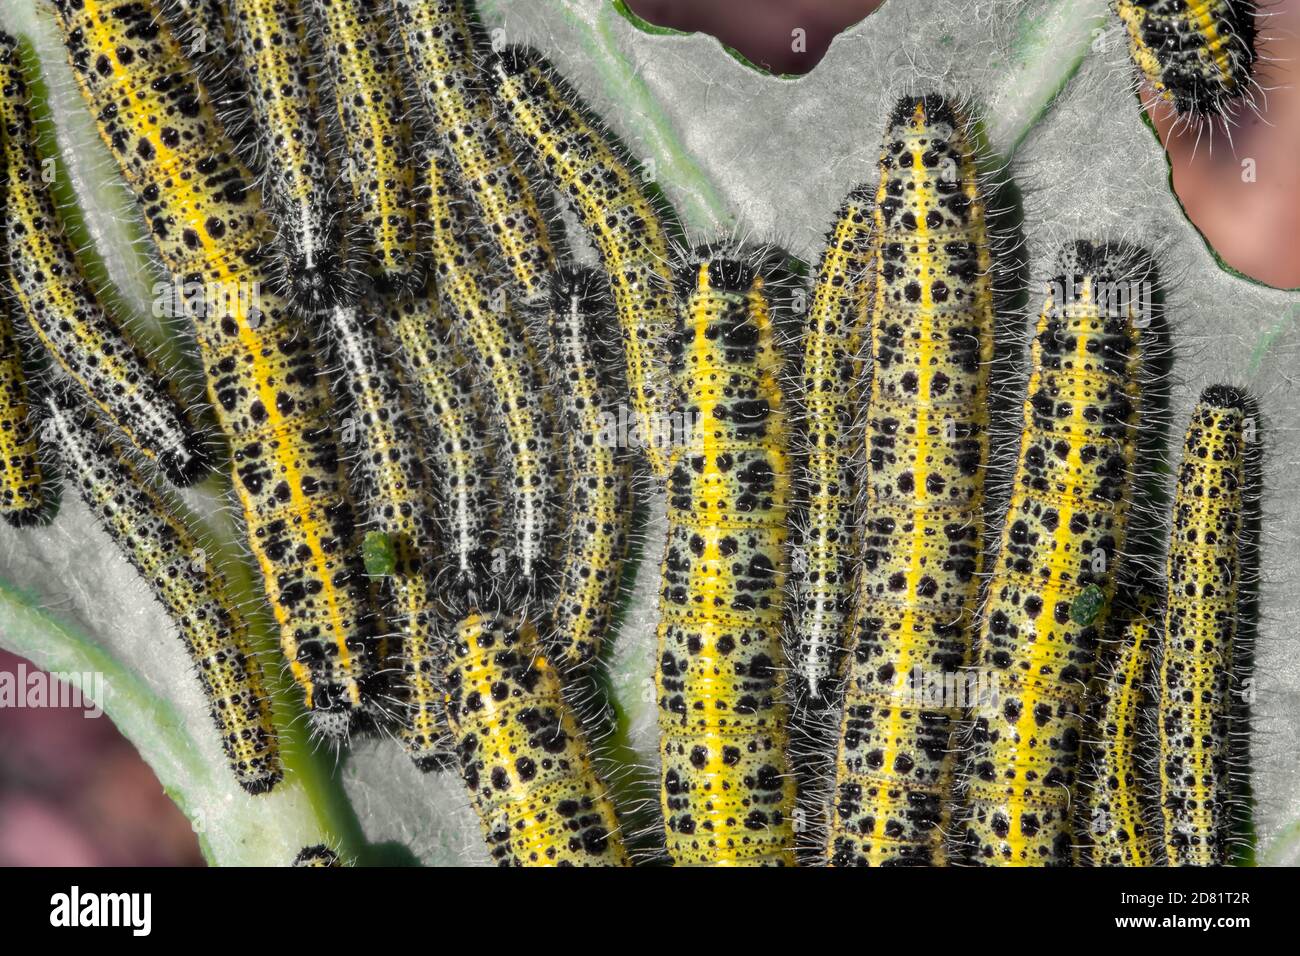 Lot of caterpillars on cabbage Stock Photo